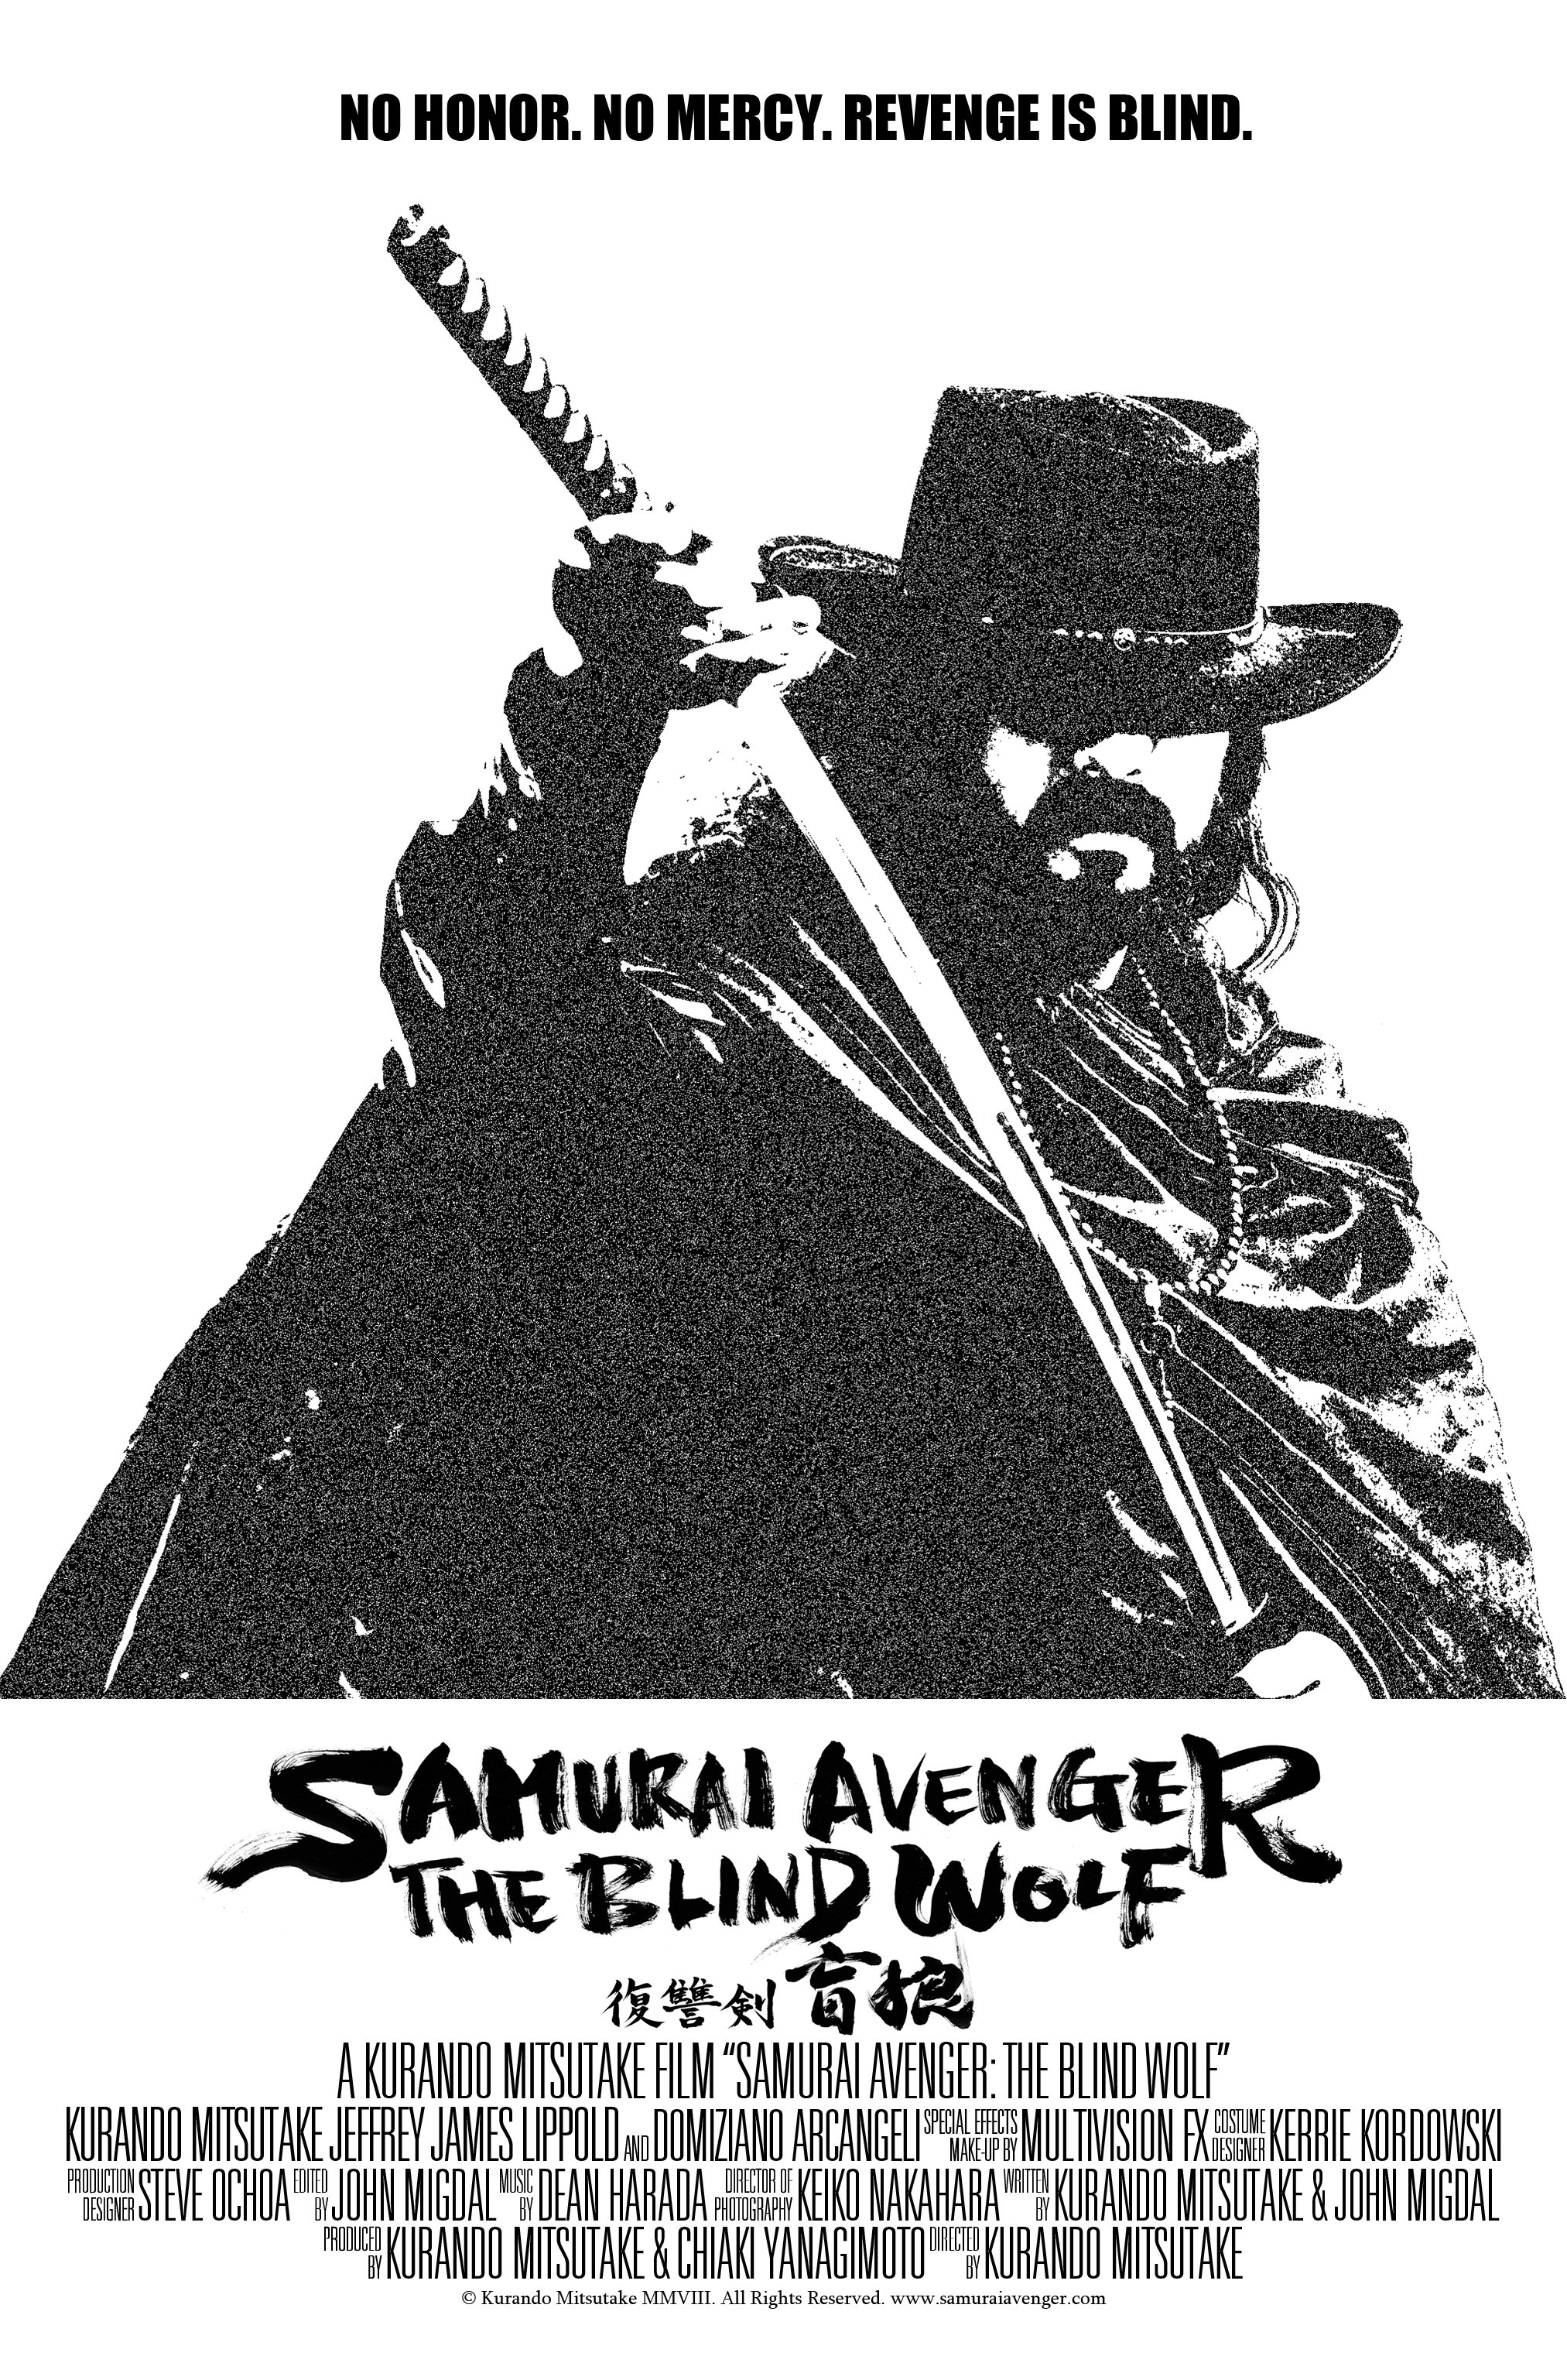 Samurai Avenger: The Blind Wolf (2009) with English Subtitles on DVD on DVD